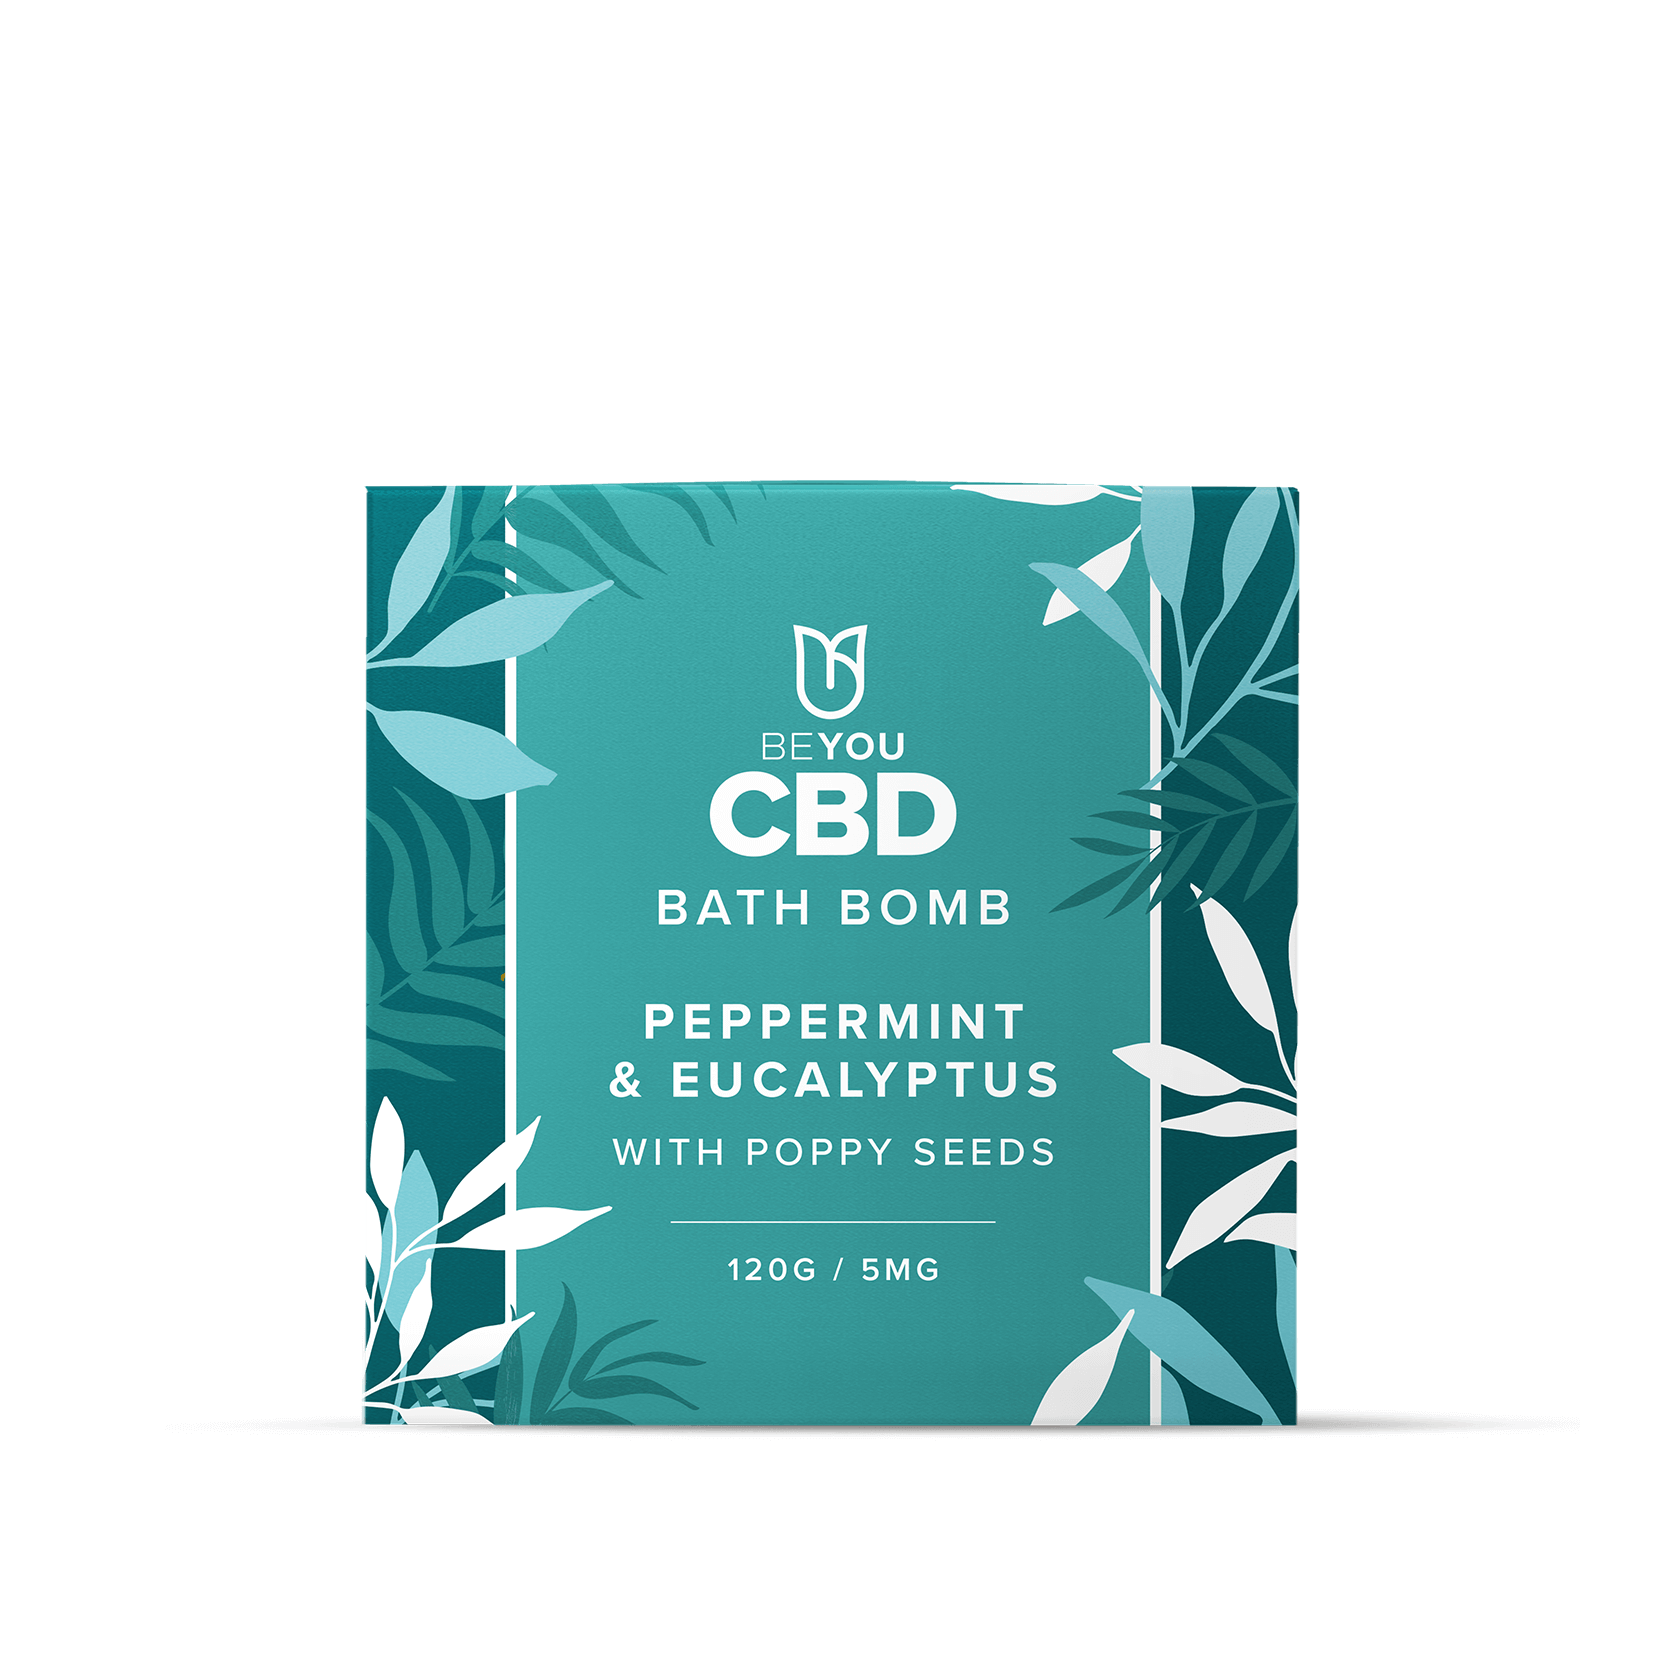 safe and effective all natural CBD bath bomb for muscle pain with peppermint essential oil and eucalyptus essential oil known for their pain relief properties